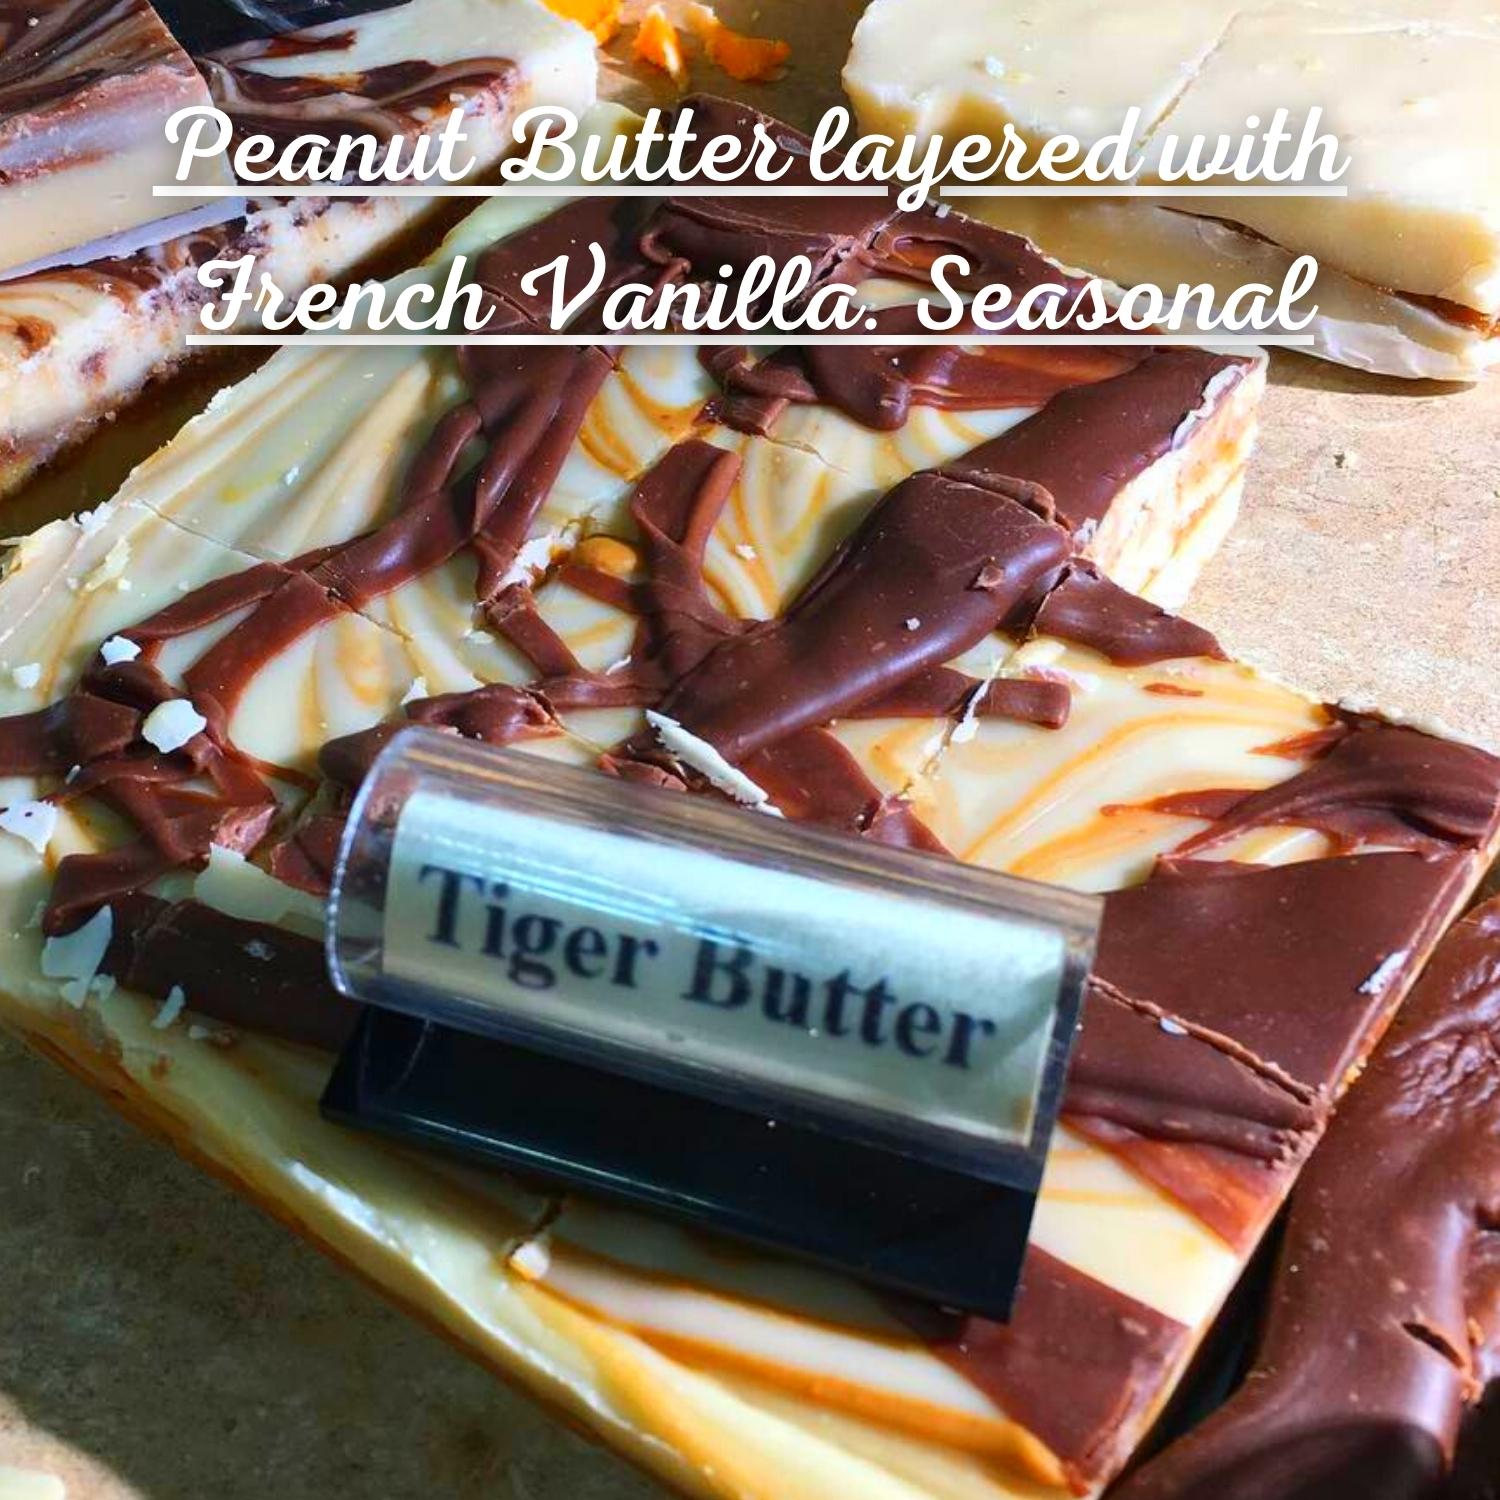 Tiger Butter Fudge Peanut Butter layered with French Vanilla. Seasonal